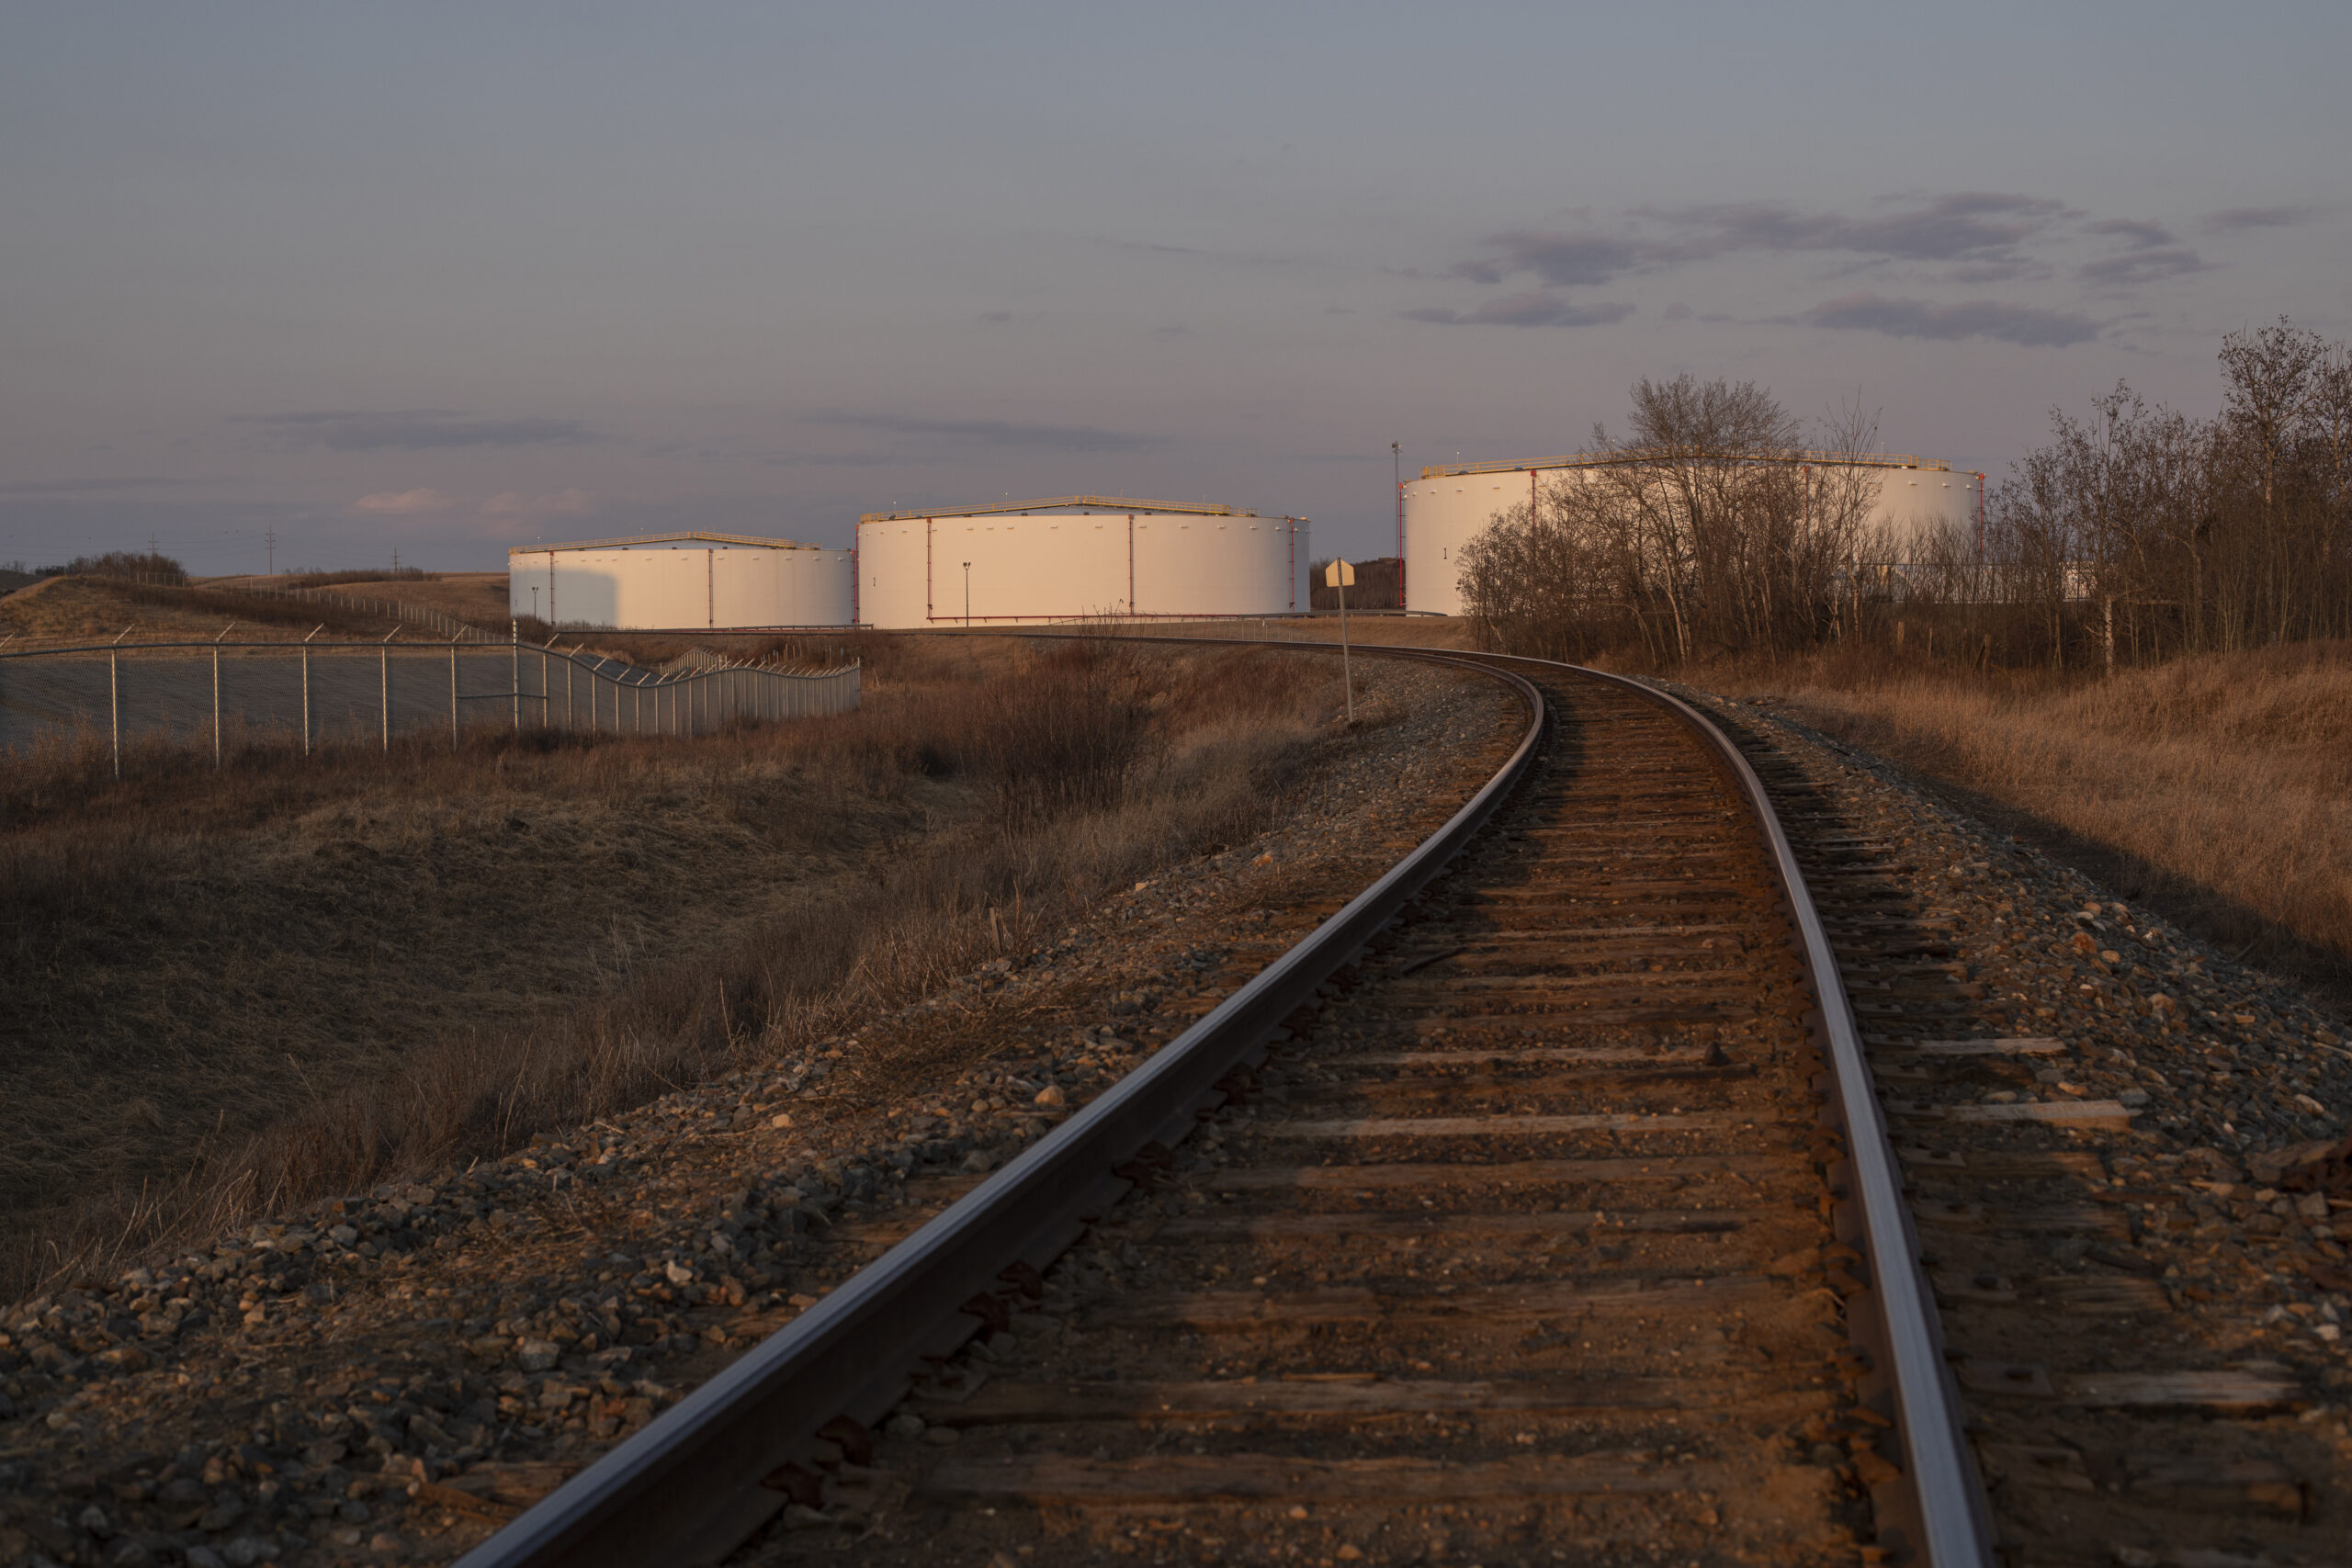 Train tracks lead to terminals in the distance at TC Energy’s Keystone A terminal in Hardisty, Alberta on April 24, 2022.